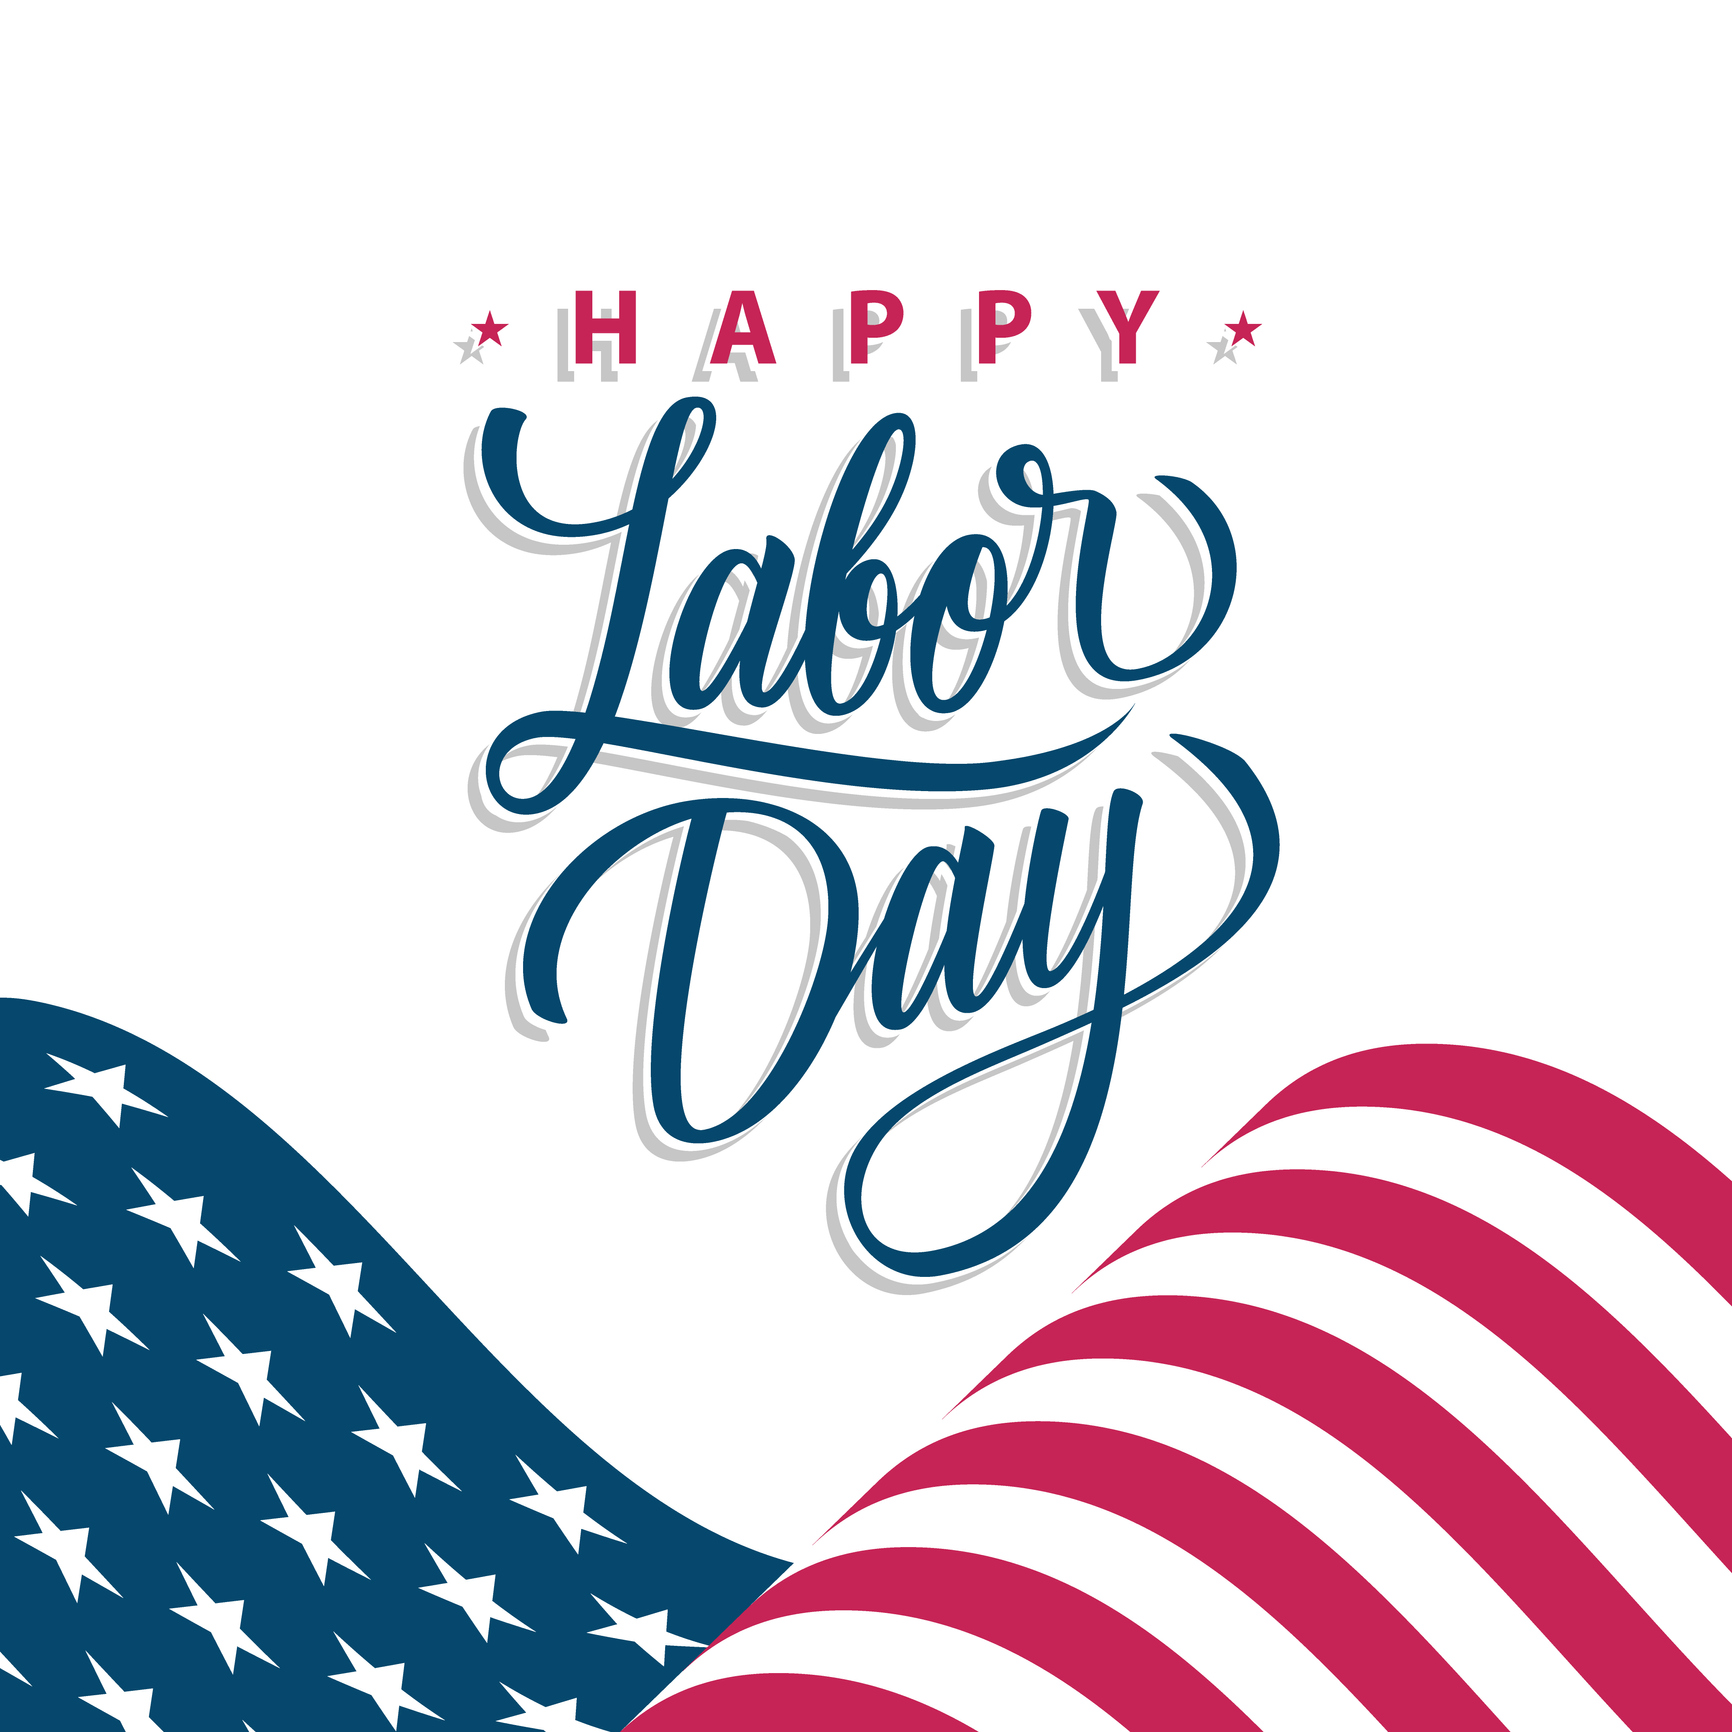 Happy Labor Day celebrate card with waving american national flag and hand lettering greetings. United States national holiday vector illustration.